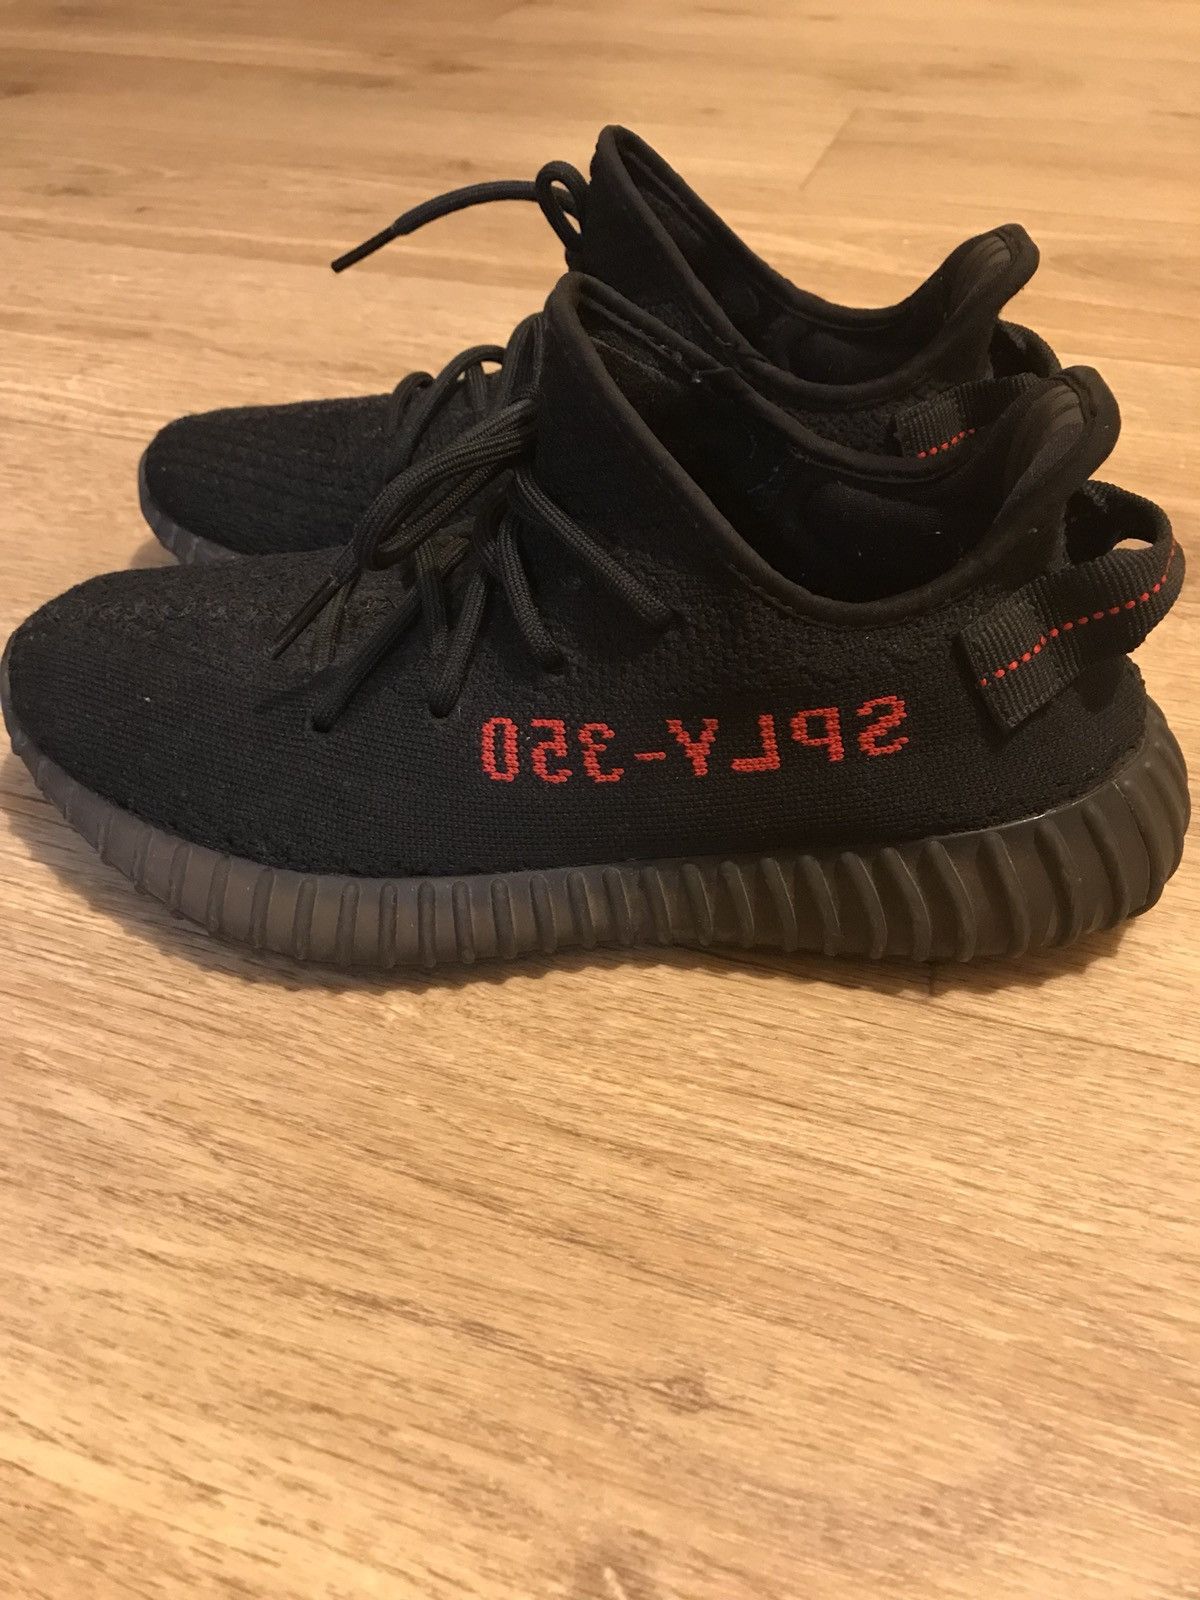 Size 10.5 - Adidas Yeezy Bred 350 Used No Box for Sale in Los